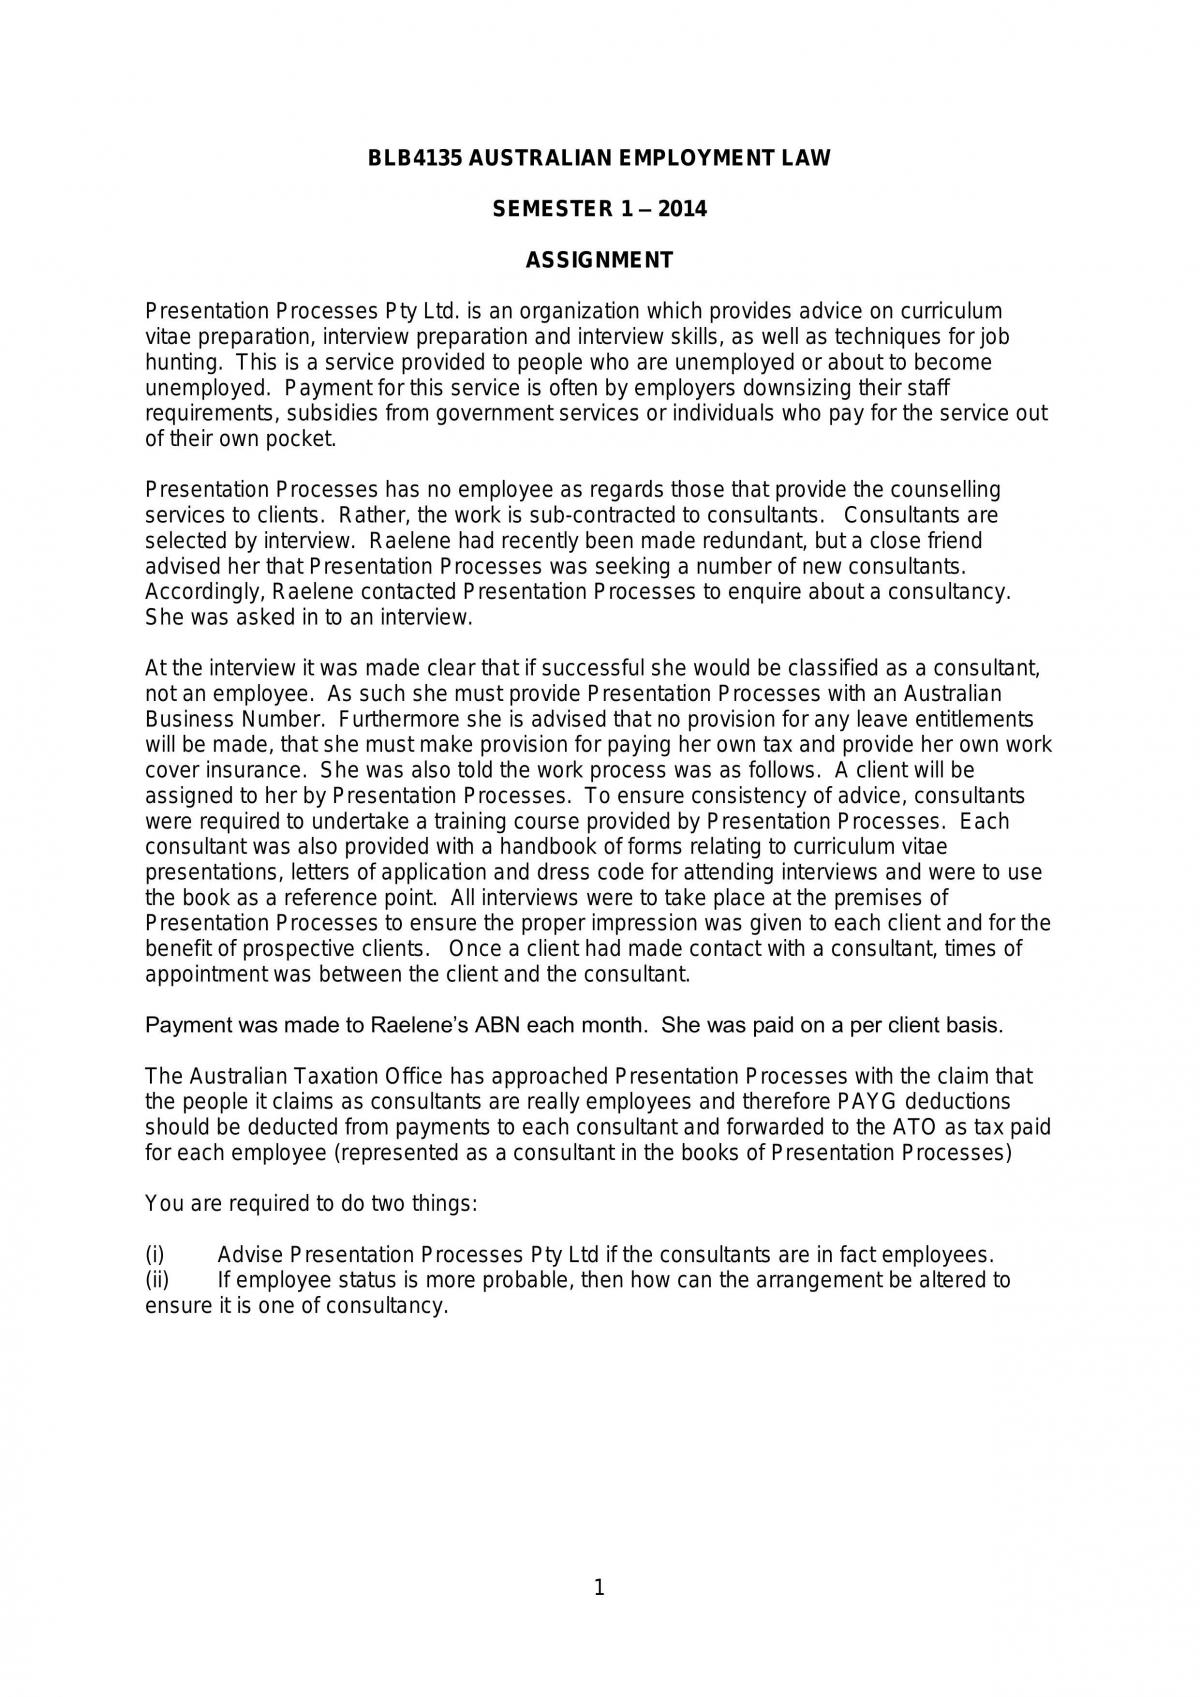 Independent contractor v employee - Page 1